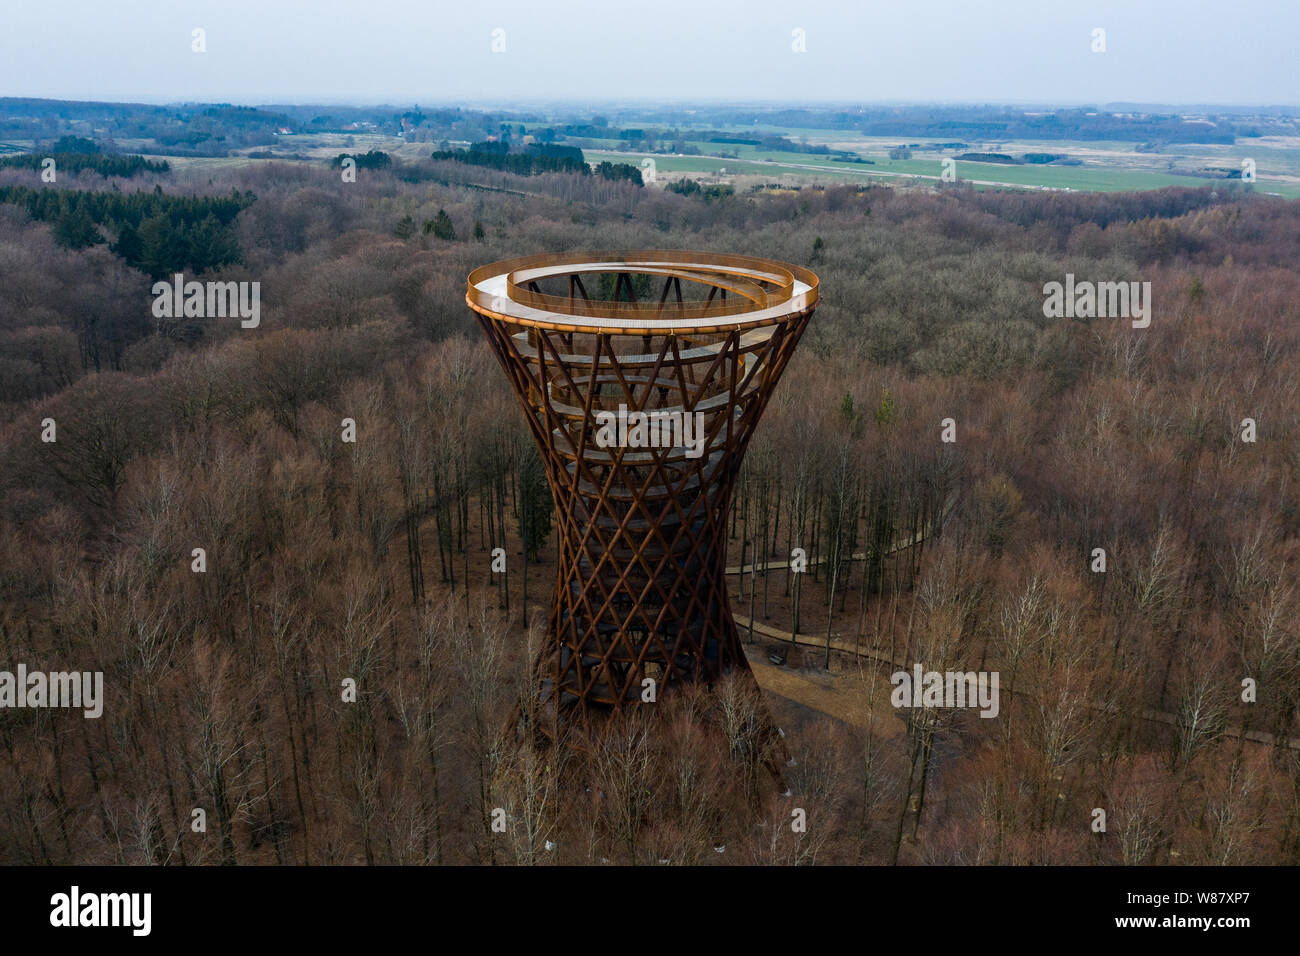 Haslev, Denmark. 3rd., April 2019. The 45 meter high spectacular spiral  wood and steel observation tower is overlooking the beautiful Gisselfeld  Klosters Forest as part of Camp Adventure in Haslev. (Photo credit: